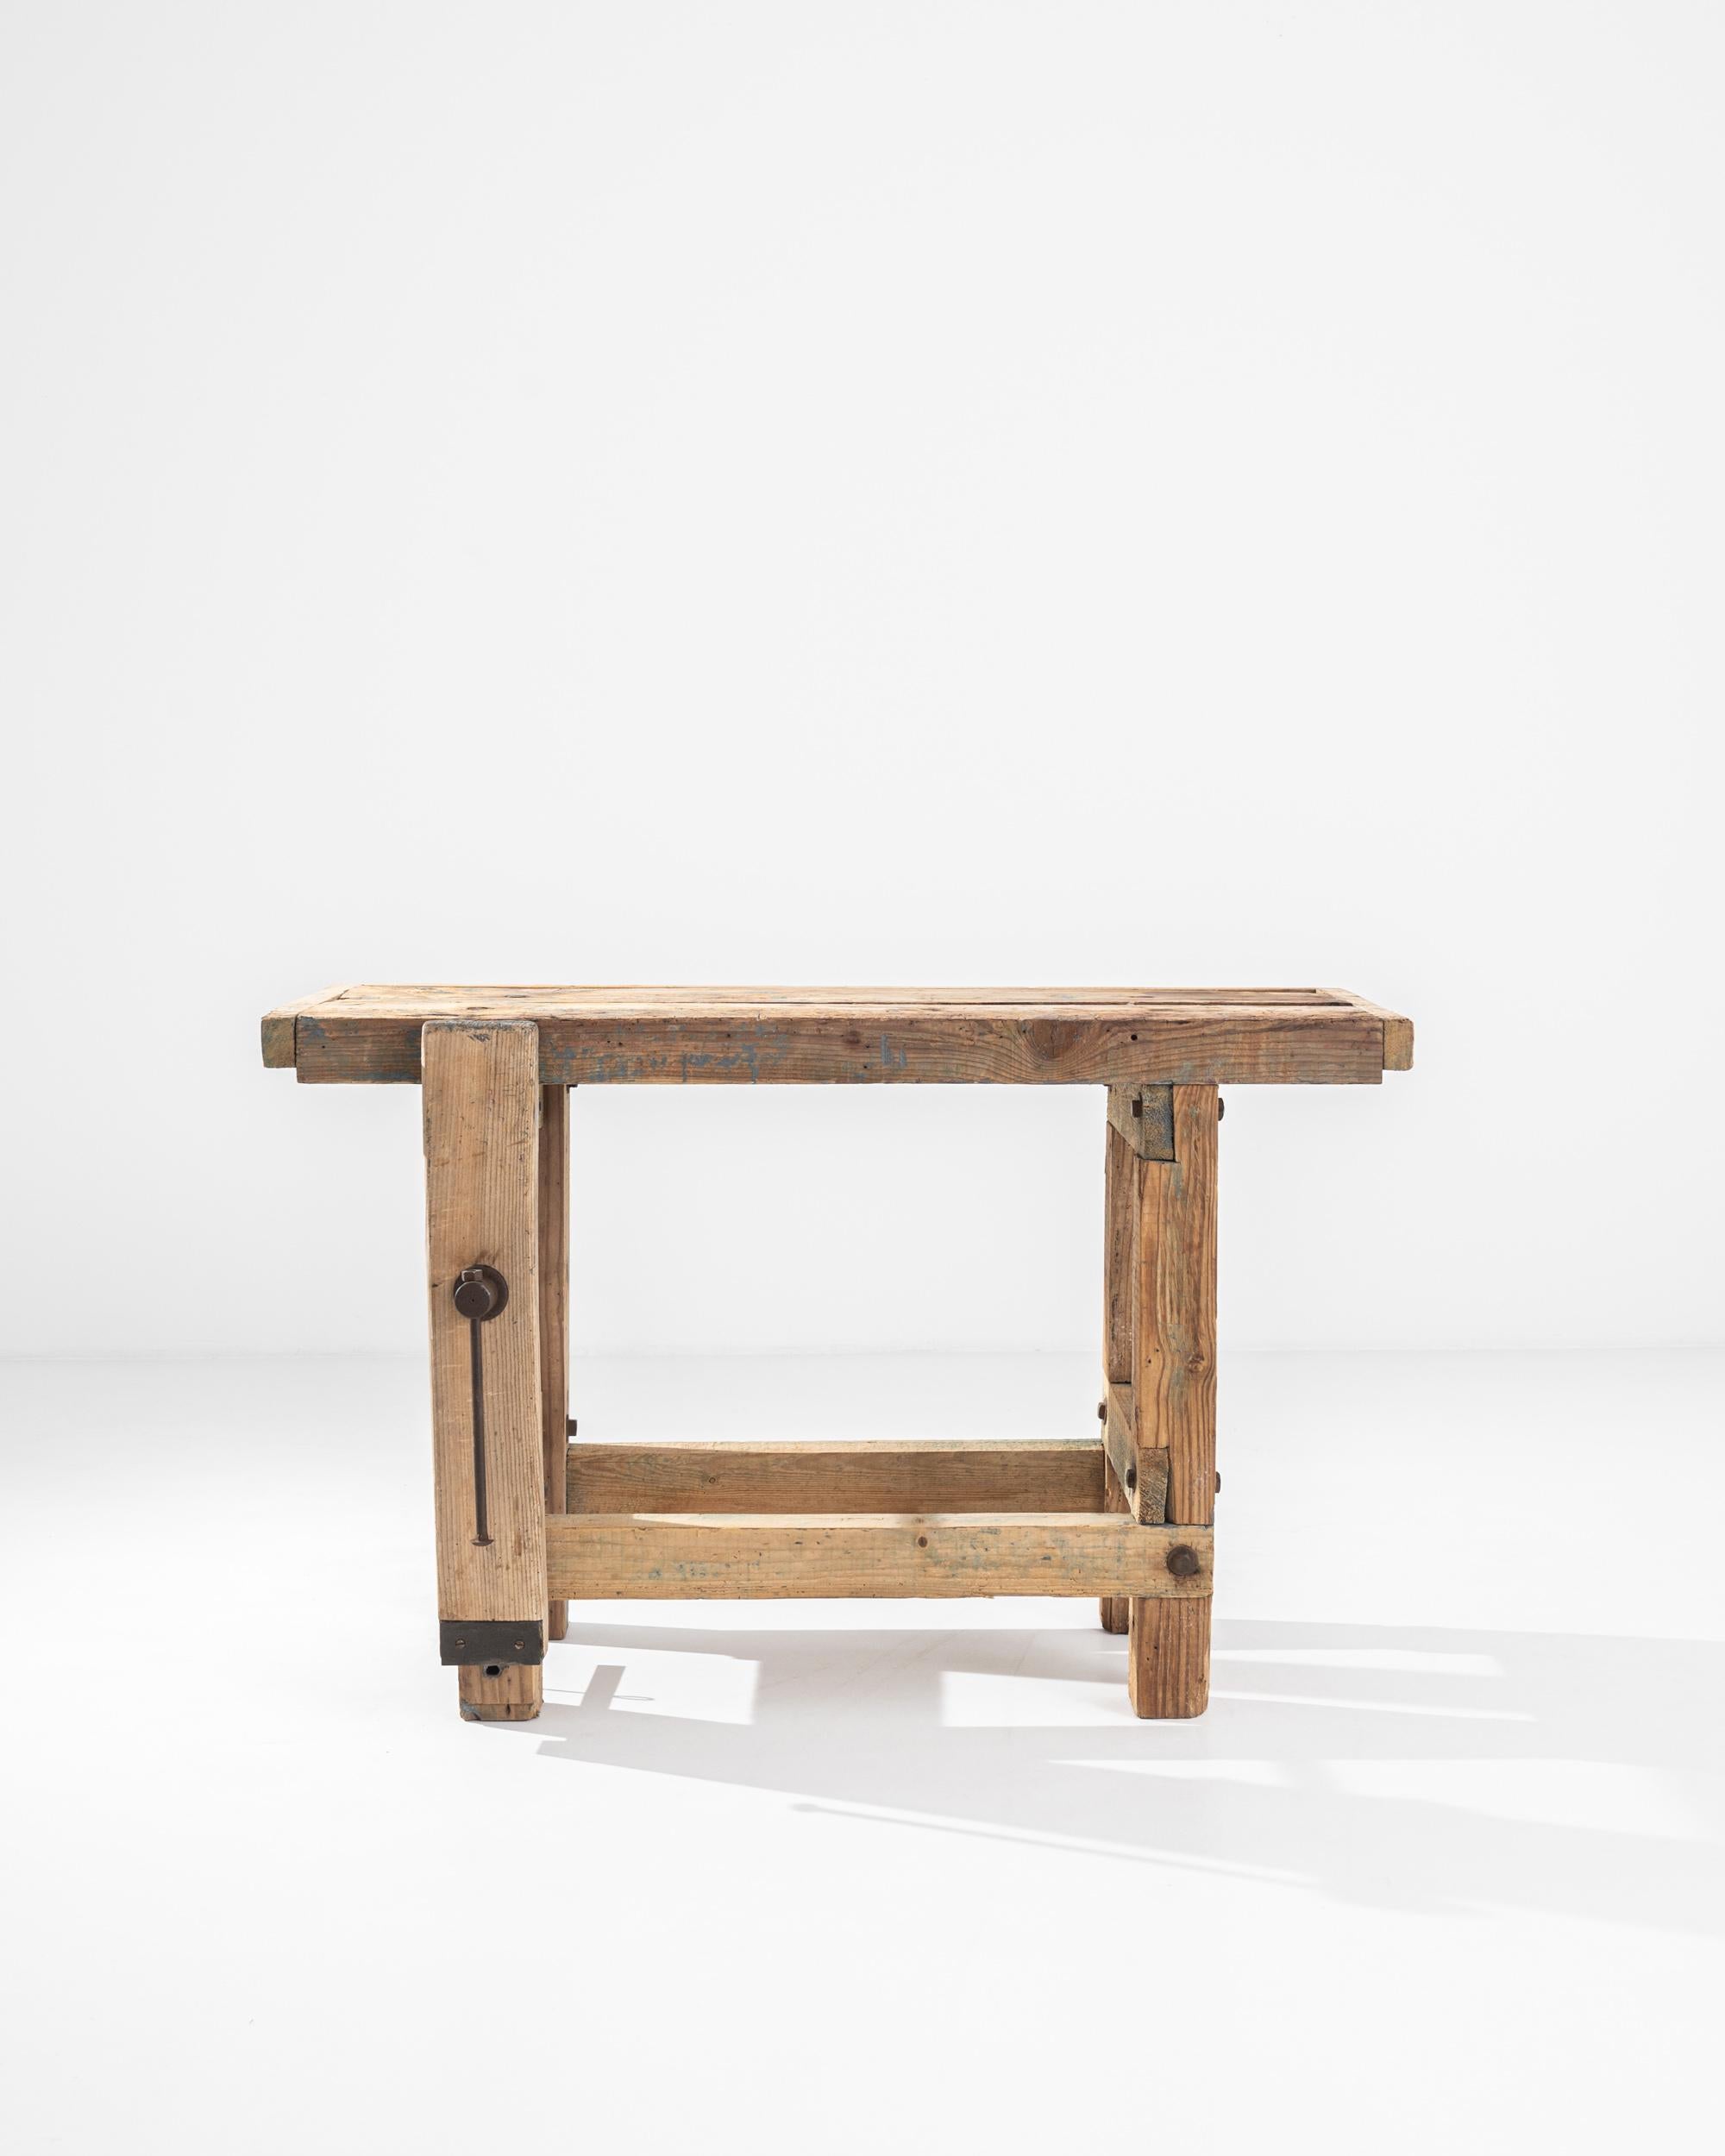 A Vintage Central European wooden work table. Constructed from stout wooden beams, crafted with the owner’s livelihood in mind. This ultimate sturdy table’s newest Craft is turning function into style. Worn and loved, the details in its construction